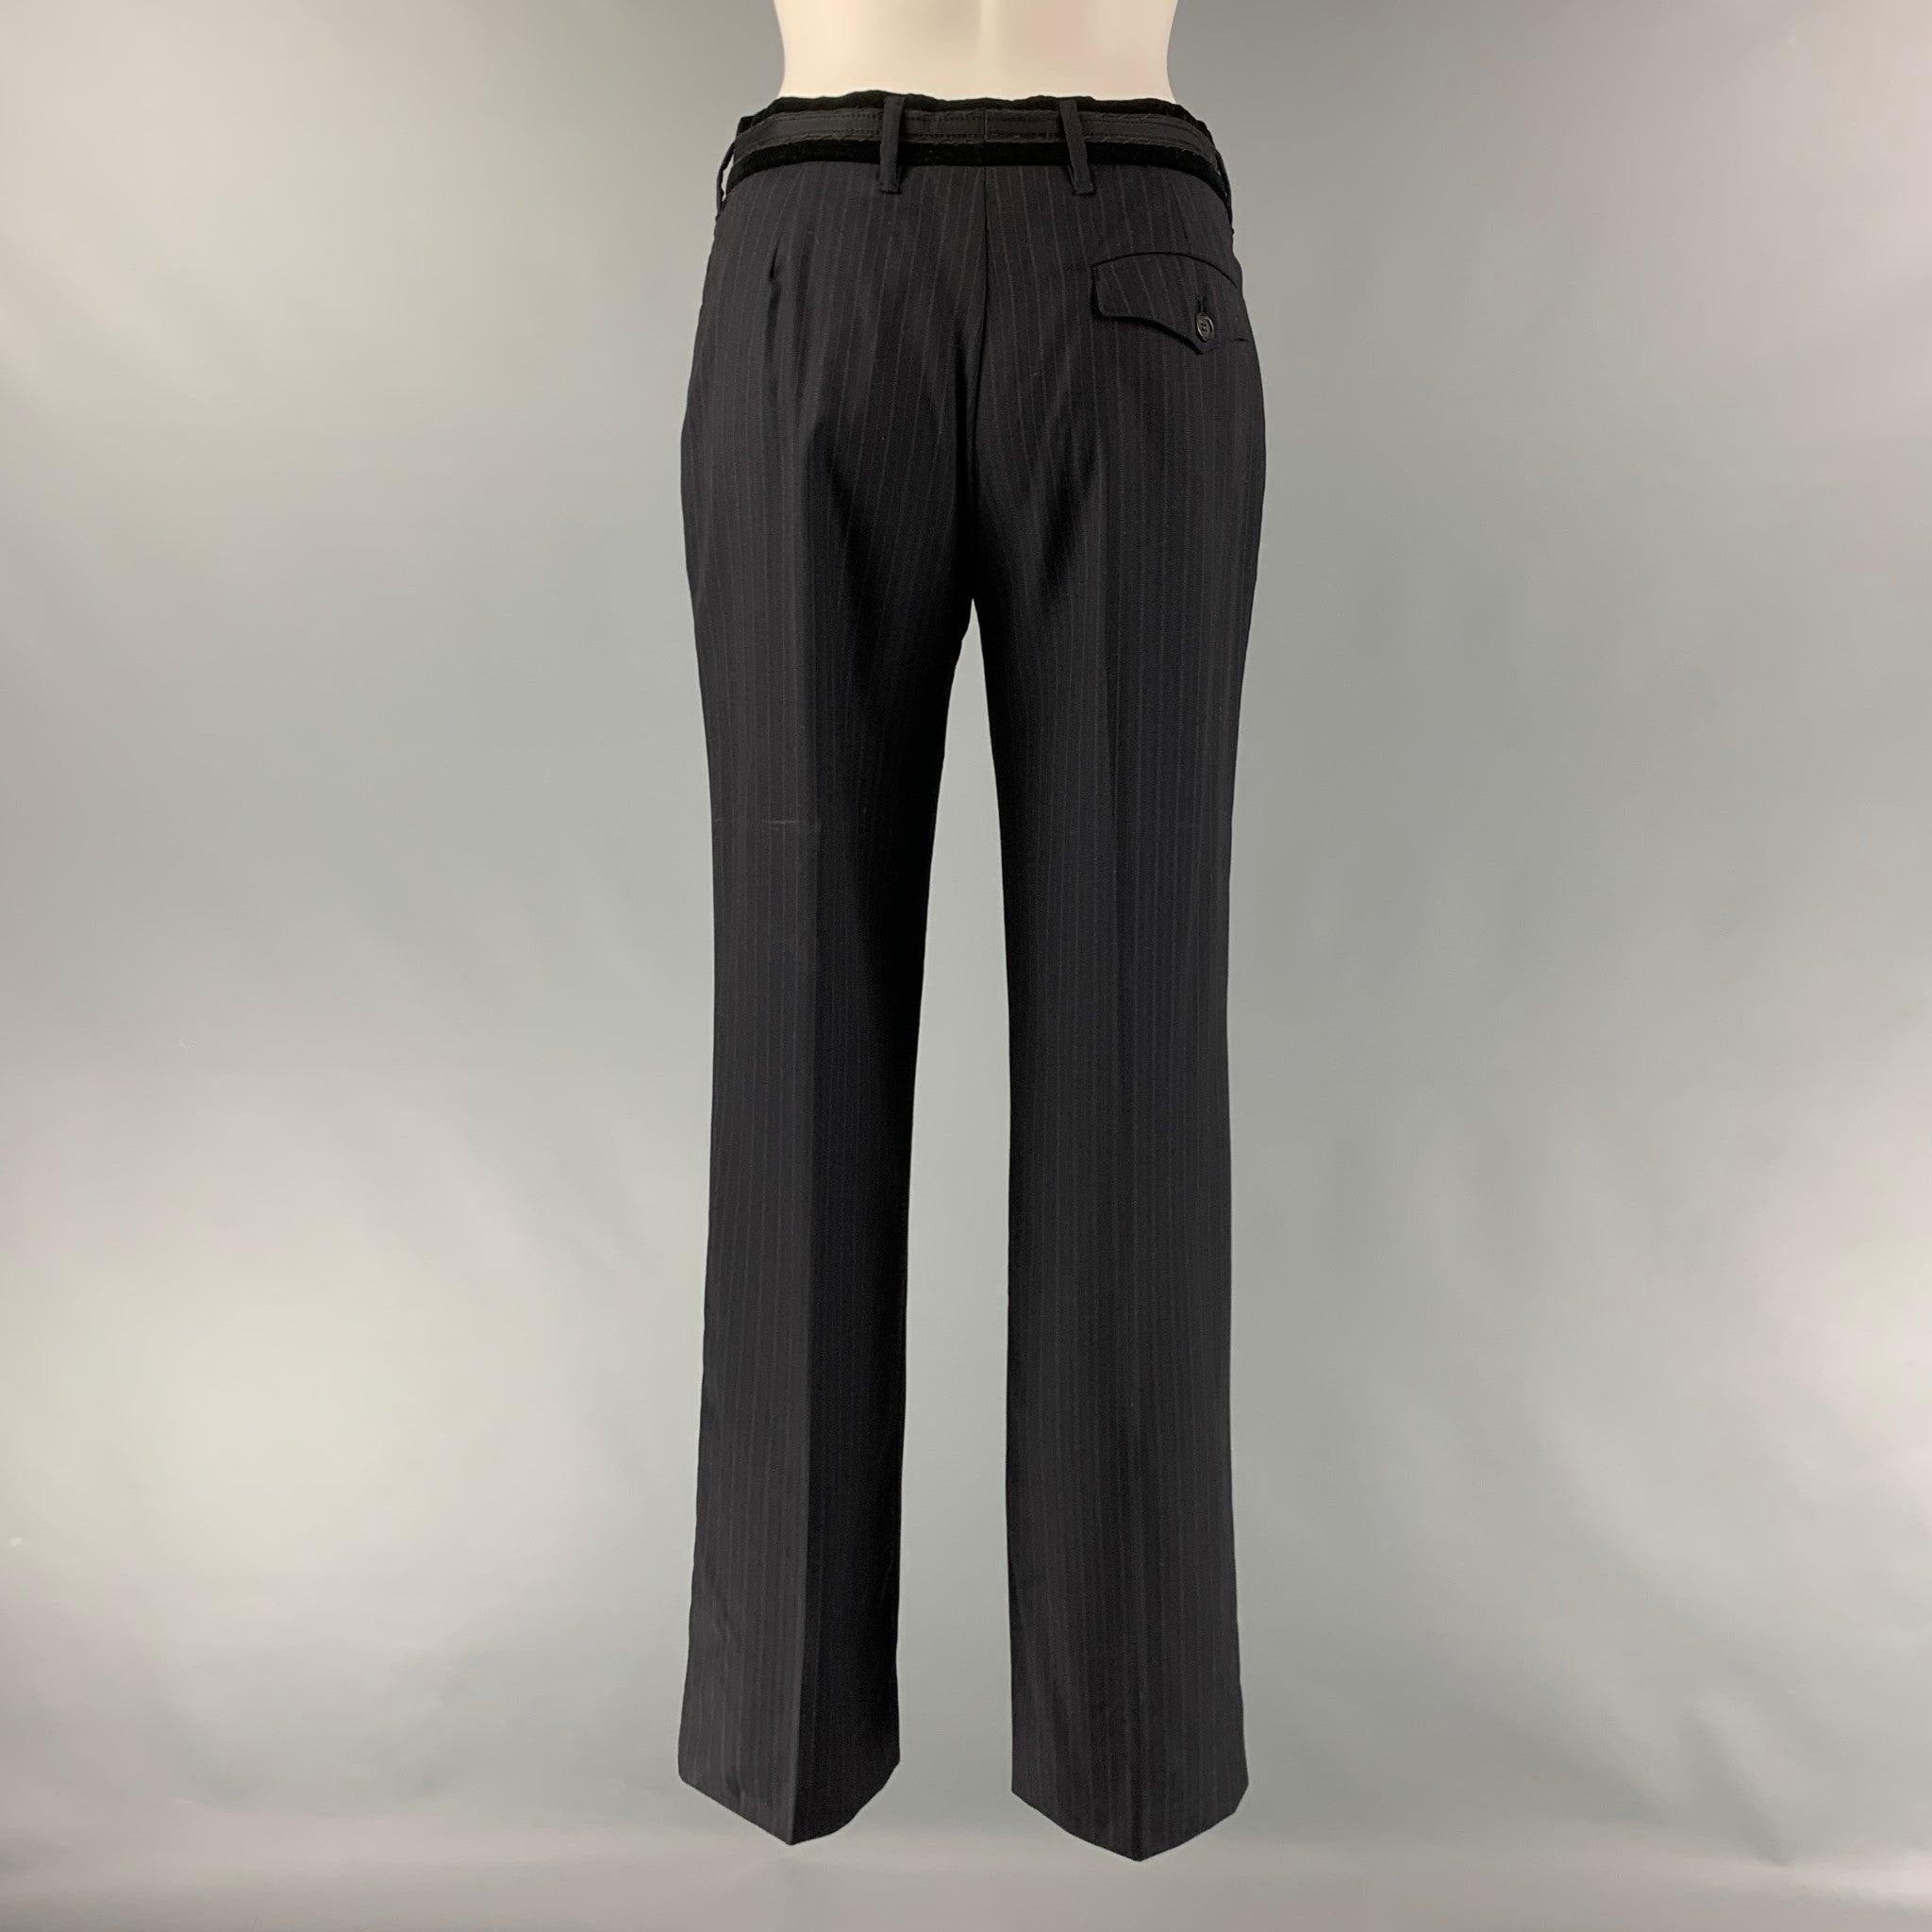 PRADA dress pants comes in a black pinstripe virgin wool featuring a straight style, velvet belt detail, front tab, and a zip fly closure. Made in Italy.Very Good Pre-Owned Condition. Minor Signs of Wear. As- Is. 
 

 Marked:  I
 40 
 

